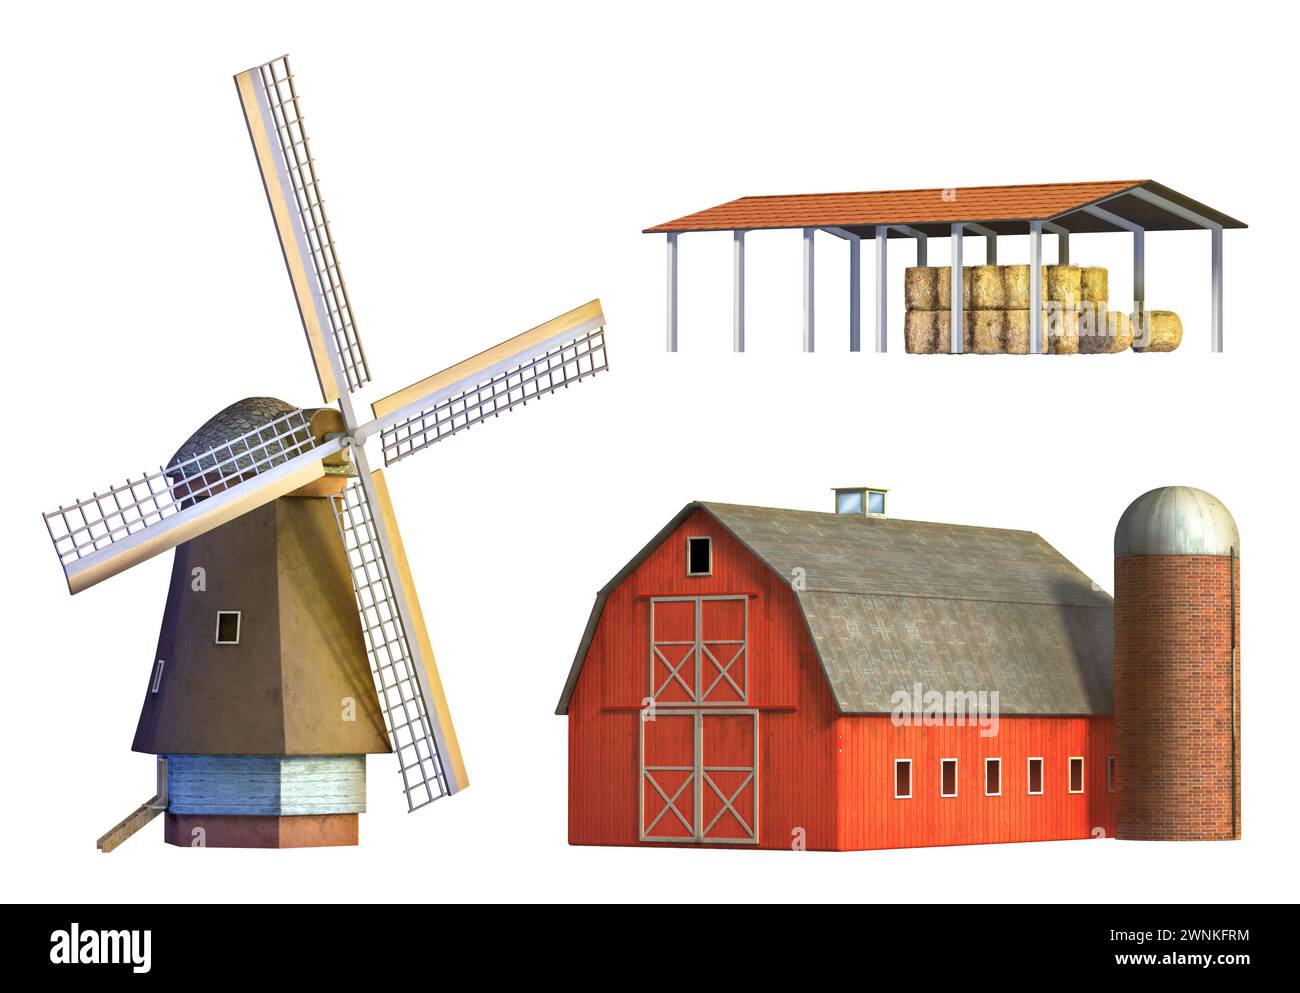 Different examples of rural architecture: windmill, barn and depot. Digital illustration, clipping path included. Stock Photo